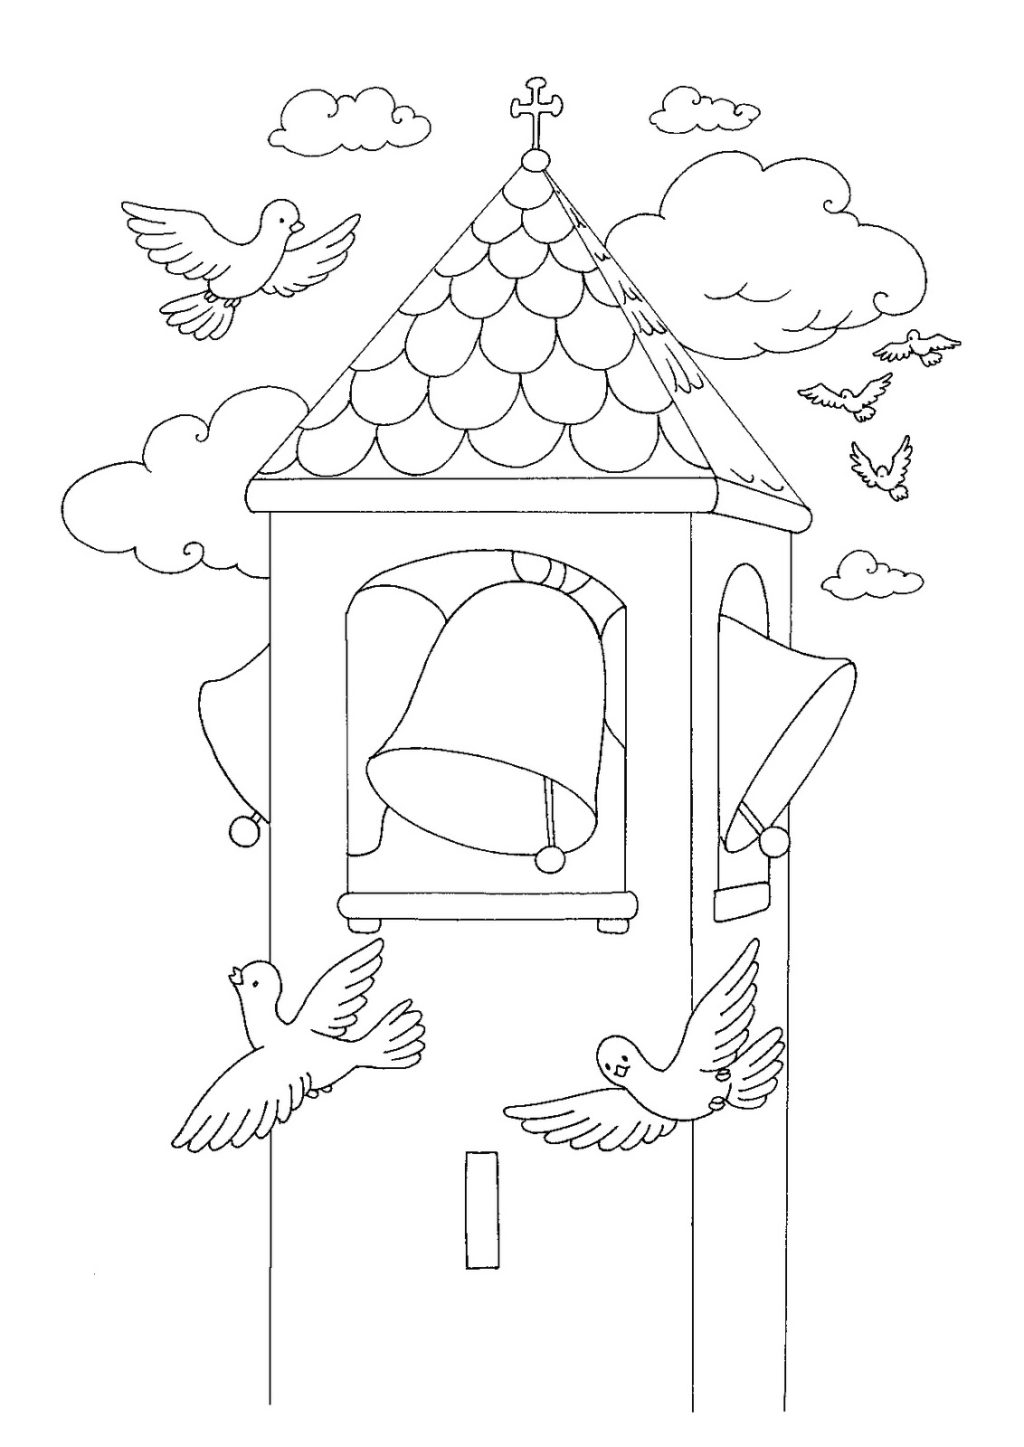 Download Worksheet Drawing Church Colouring Doll Pictures Religious Coloring Pages Kids Images Christian Disney Children Going